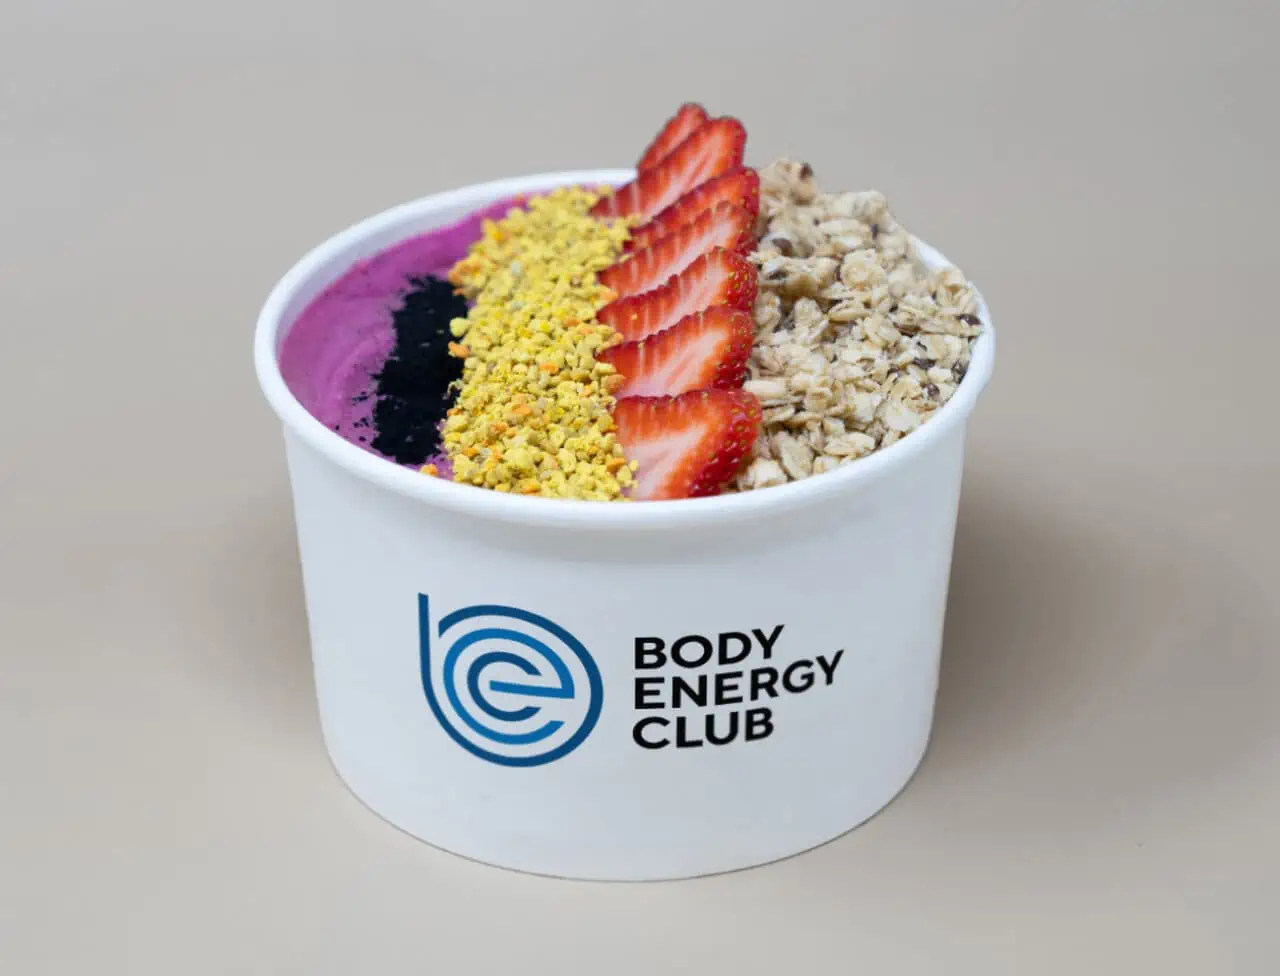 Our Strawberry Acai Bowl in a white paper bowl